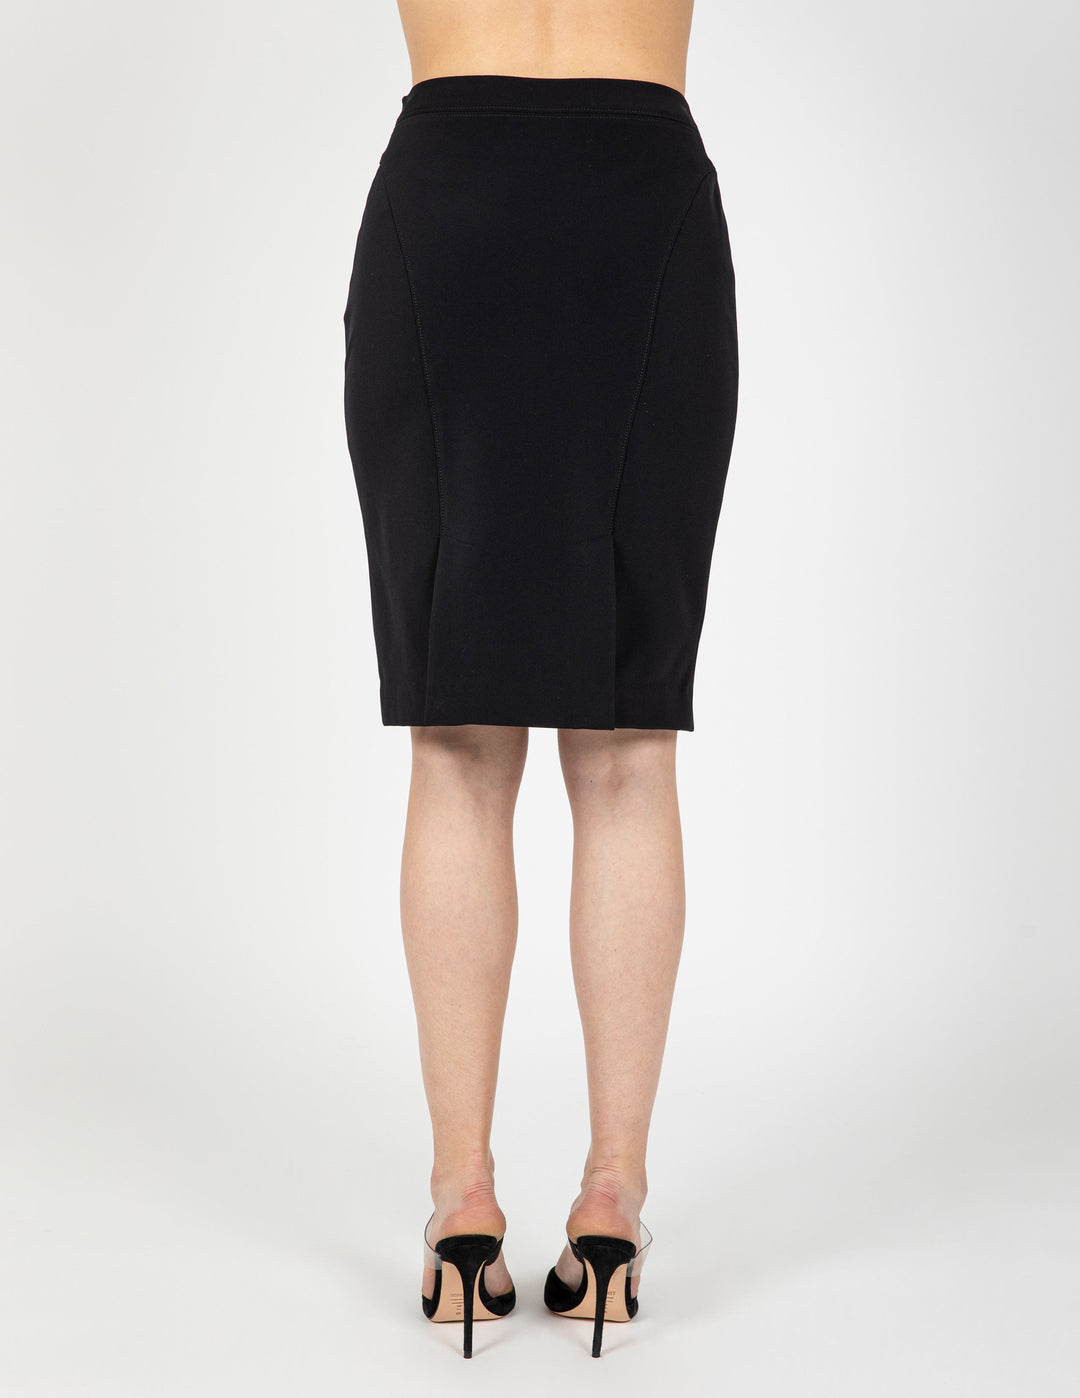 MIRACLE STRETCH SKIRT